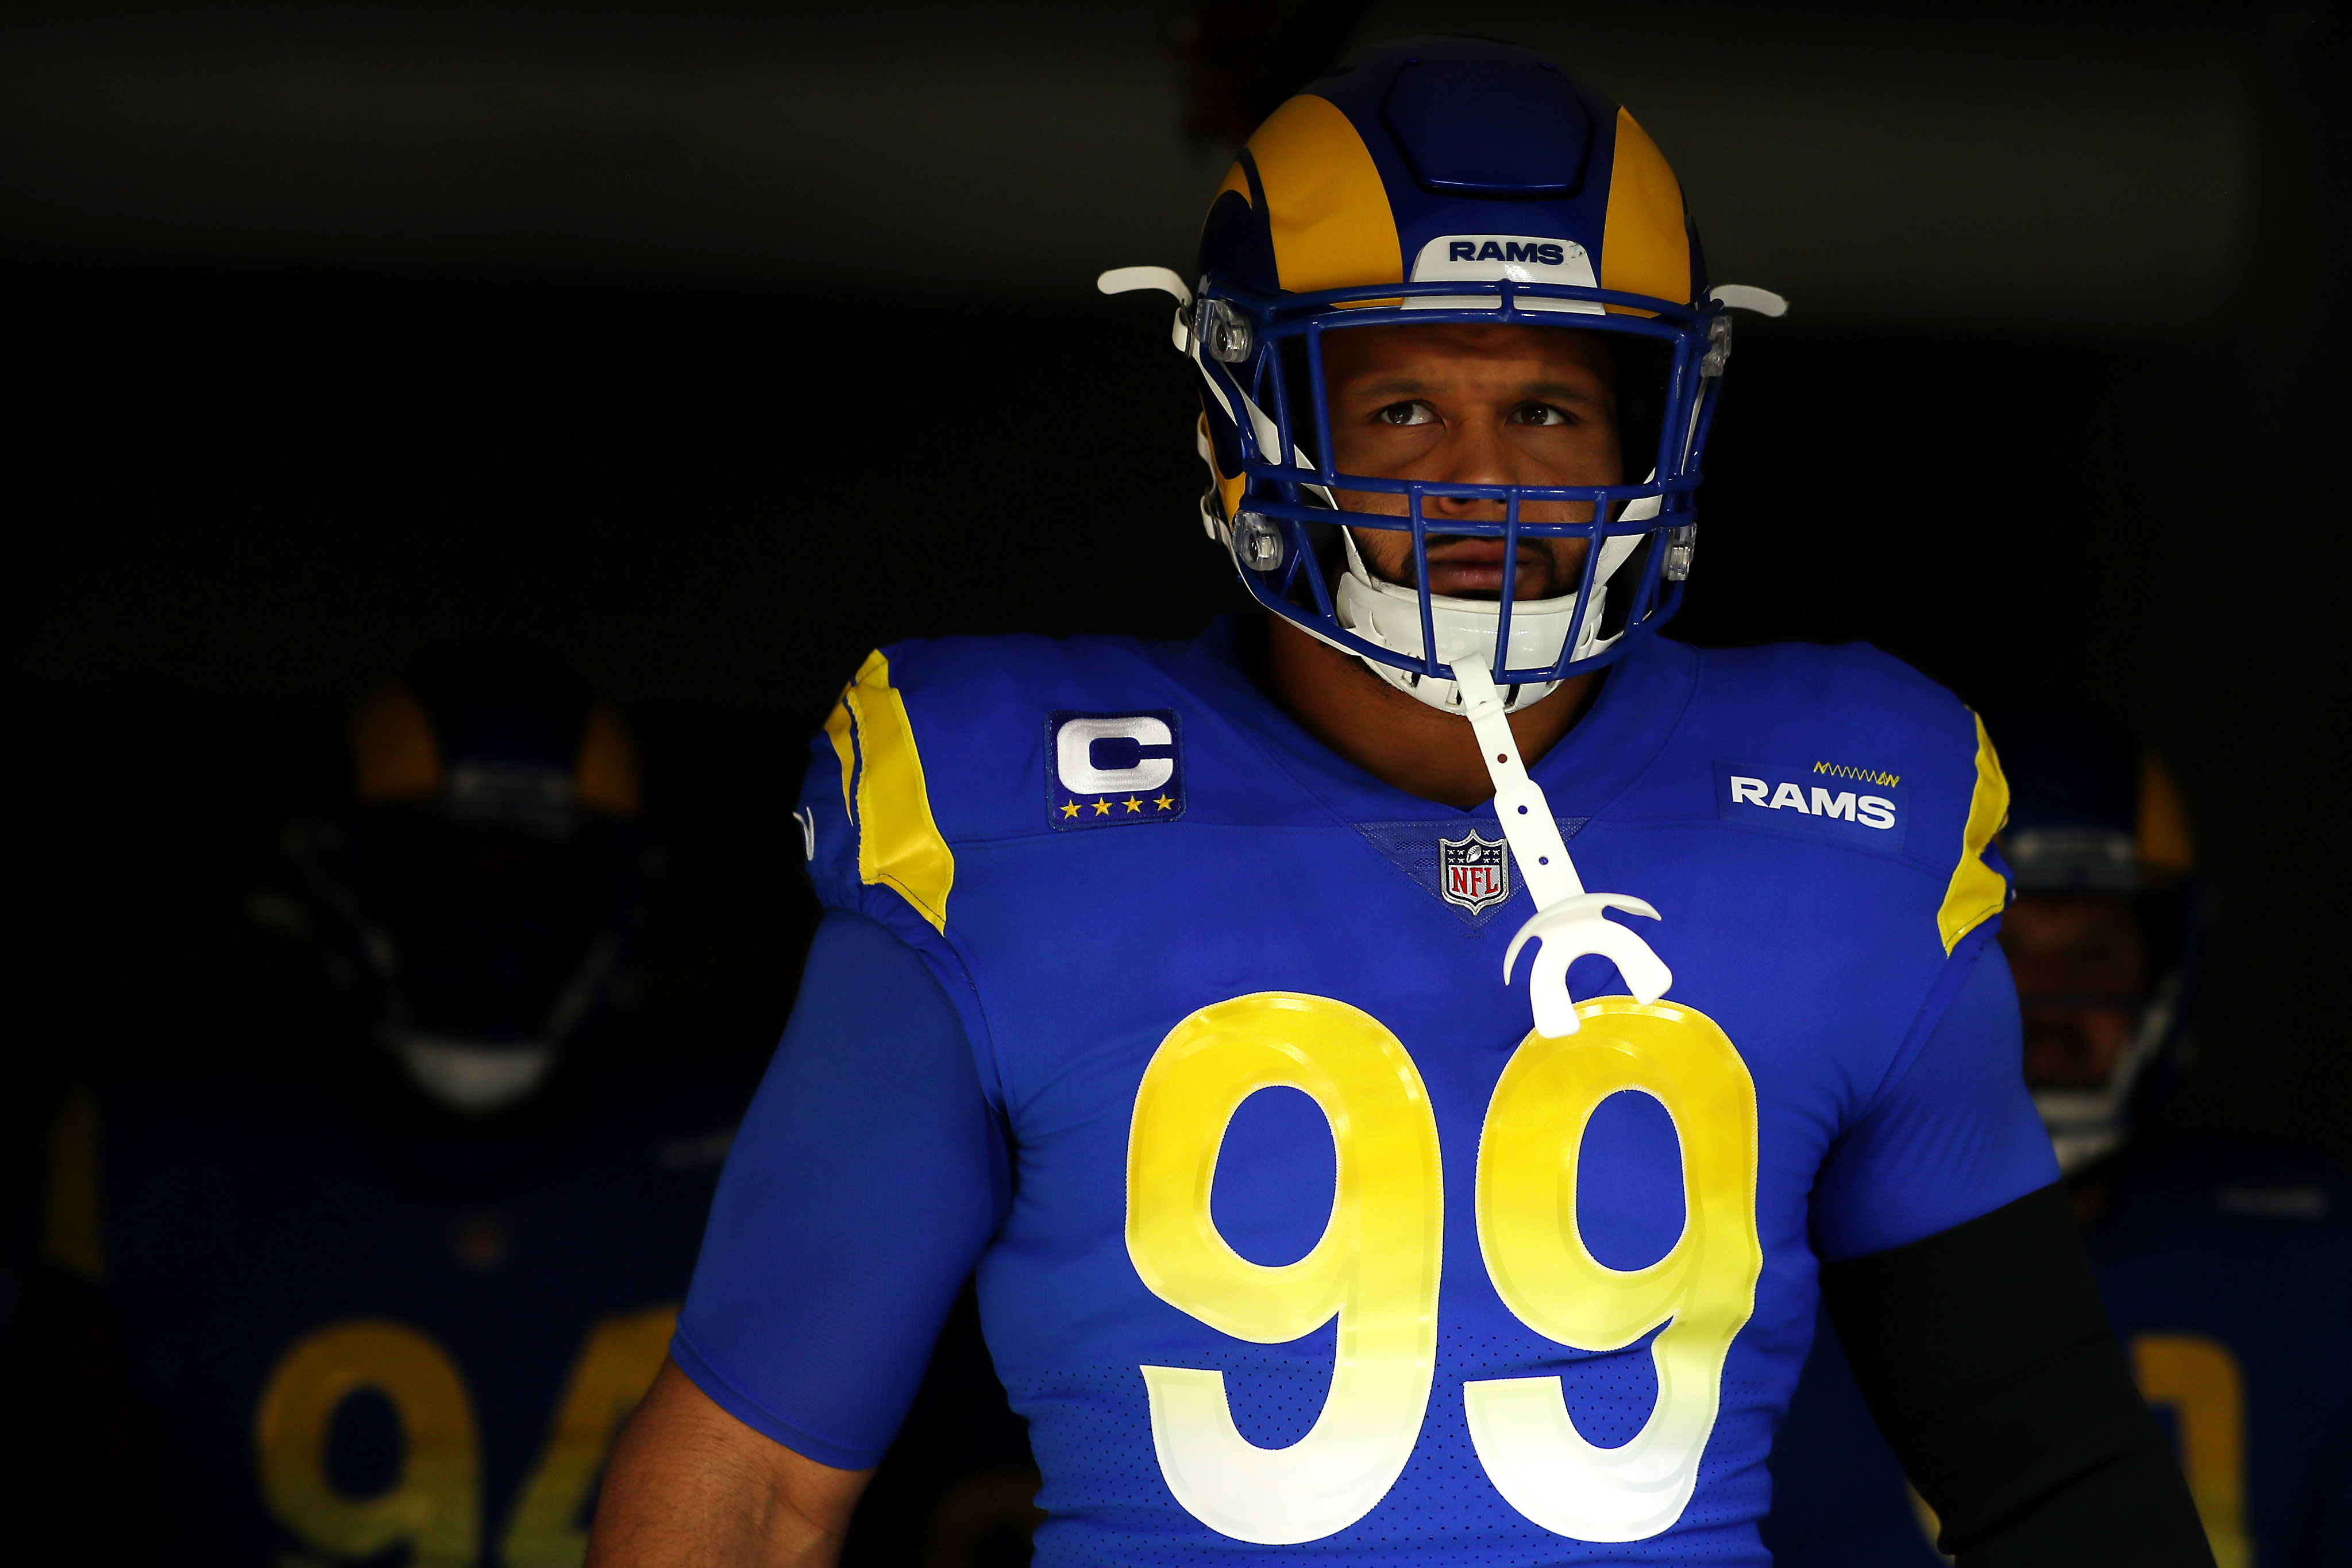 Rams defensive tackle Aaron Donald in the tunnel before game against the 49ers